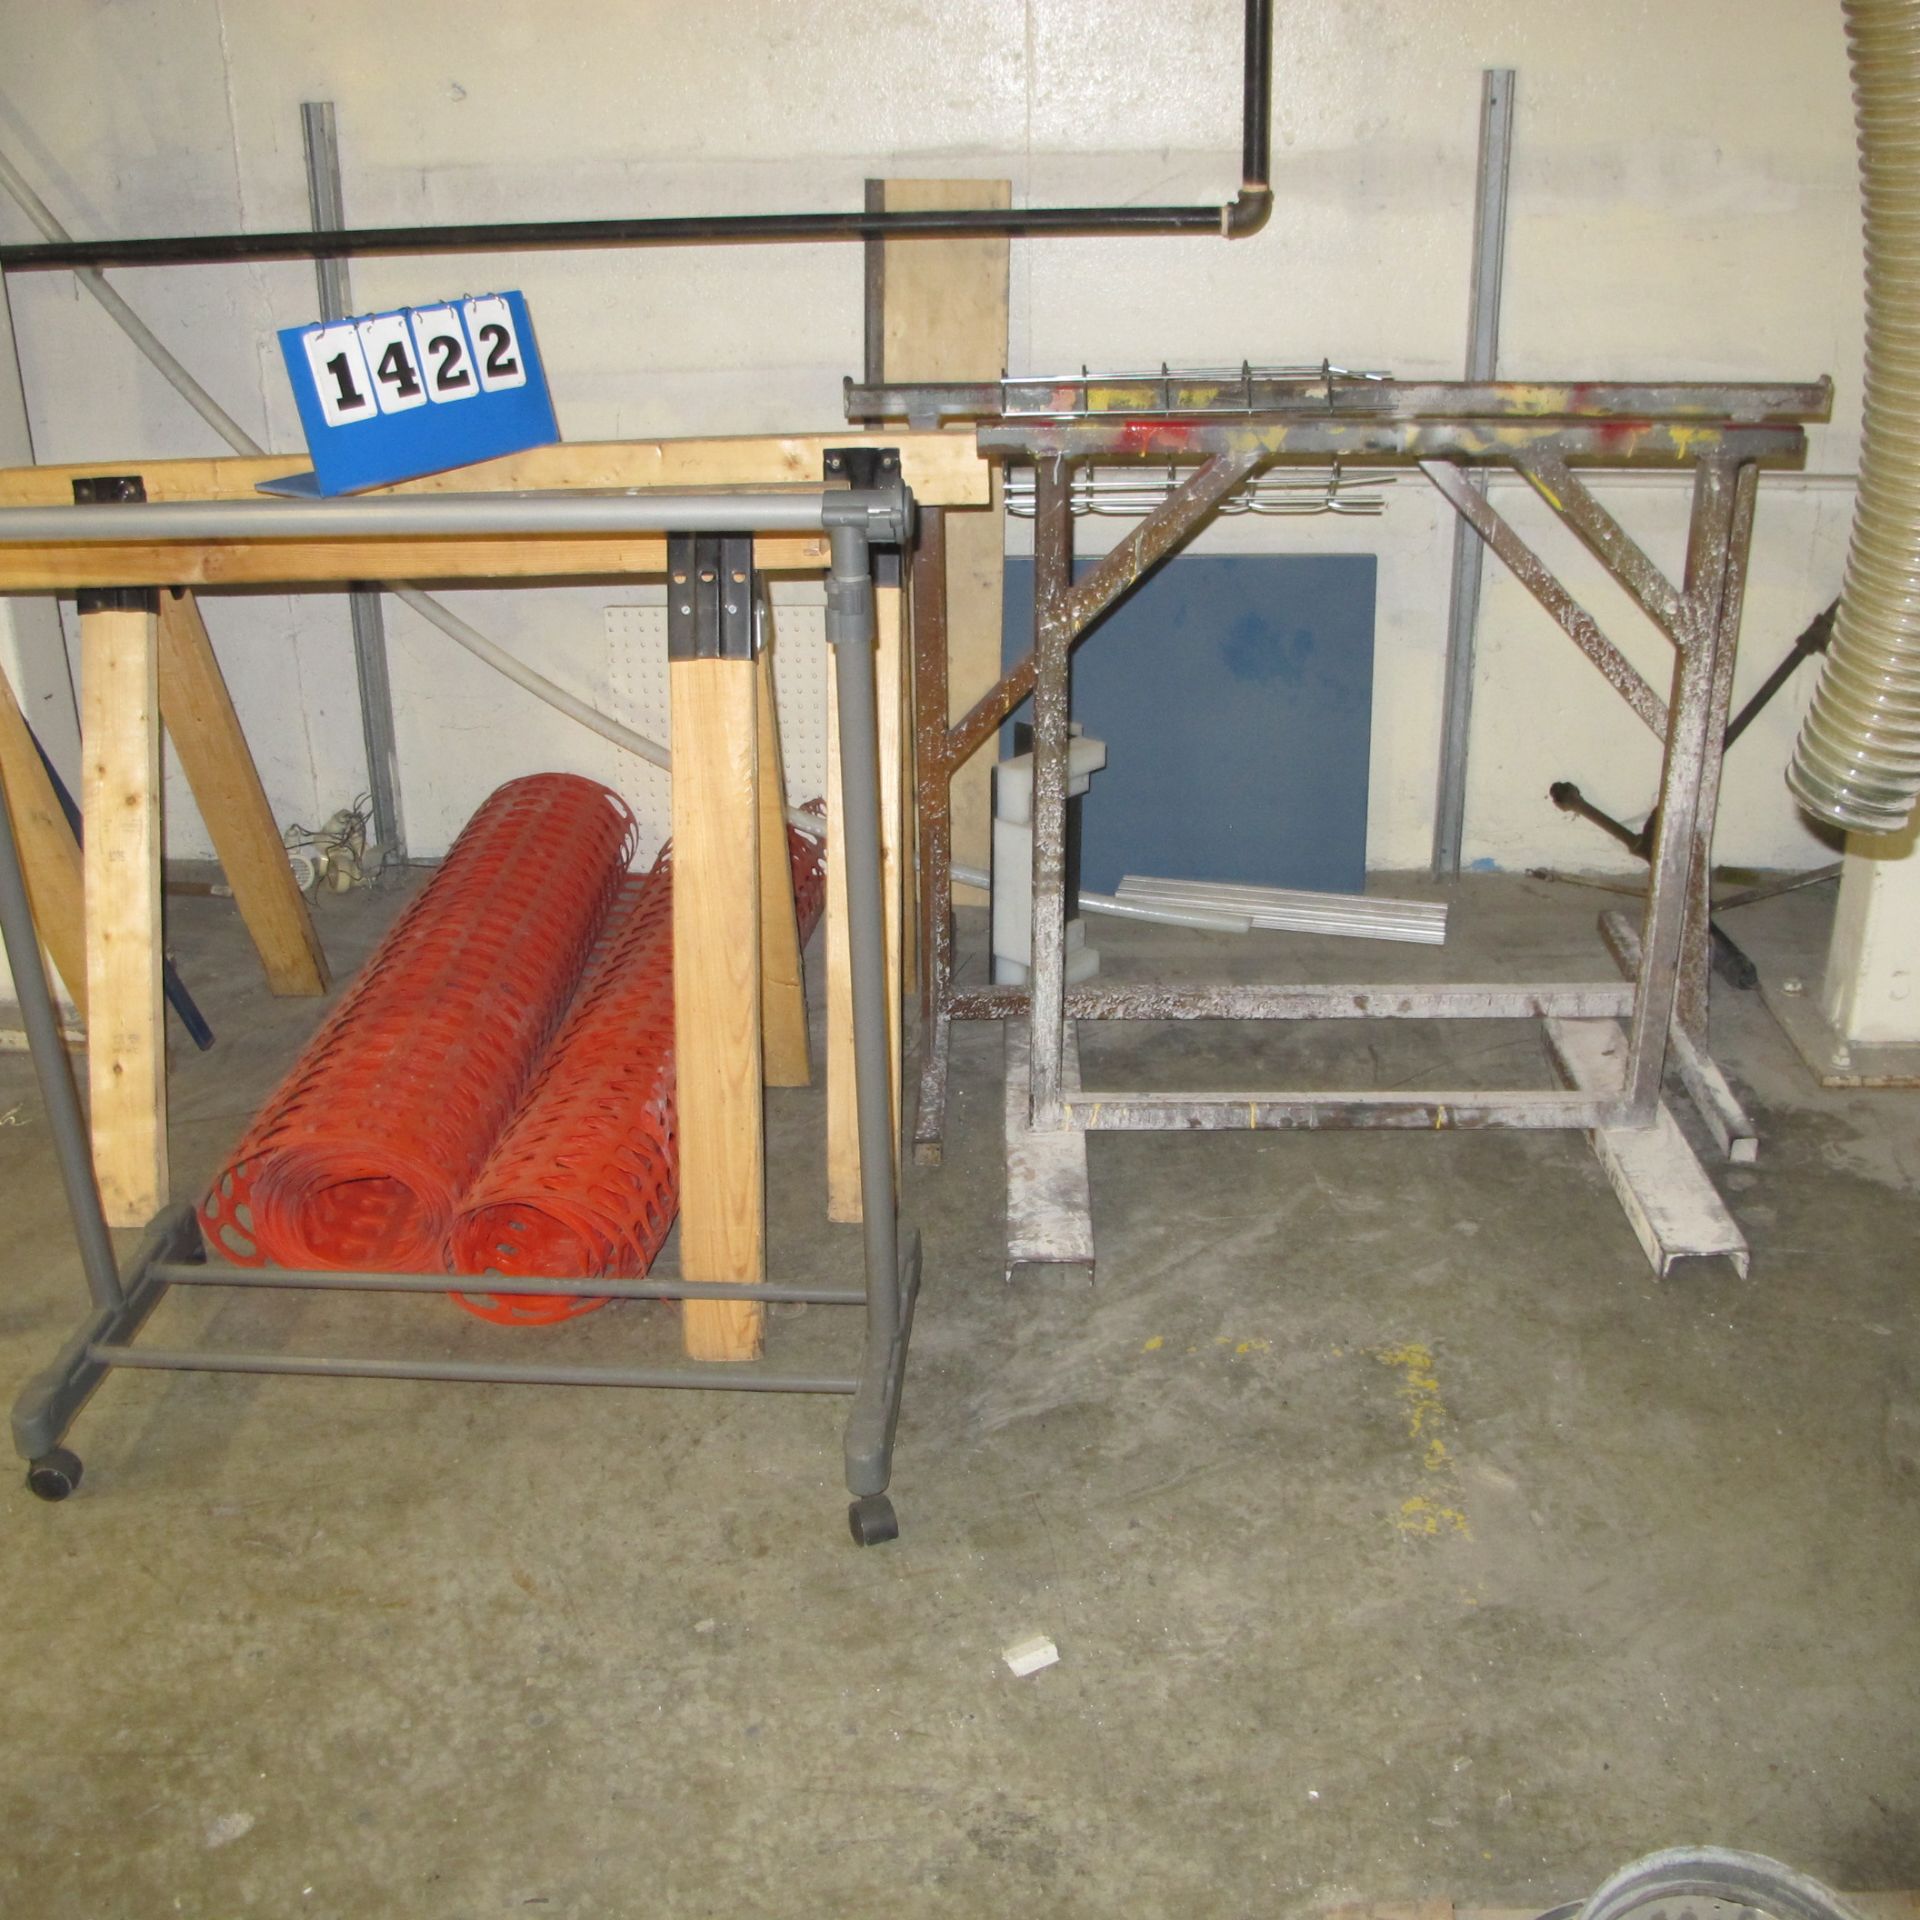 MIXED LOT OF METAL, HOSES, VENTING, HARDWARE, ROLLING CART, 2 BENCHES, 1 SHELVING UNIT - Image 3 of 5